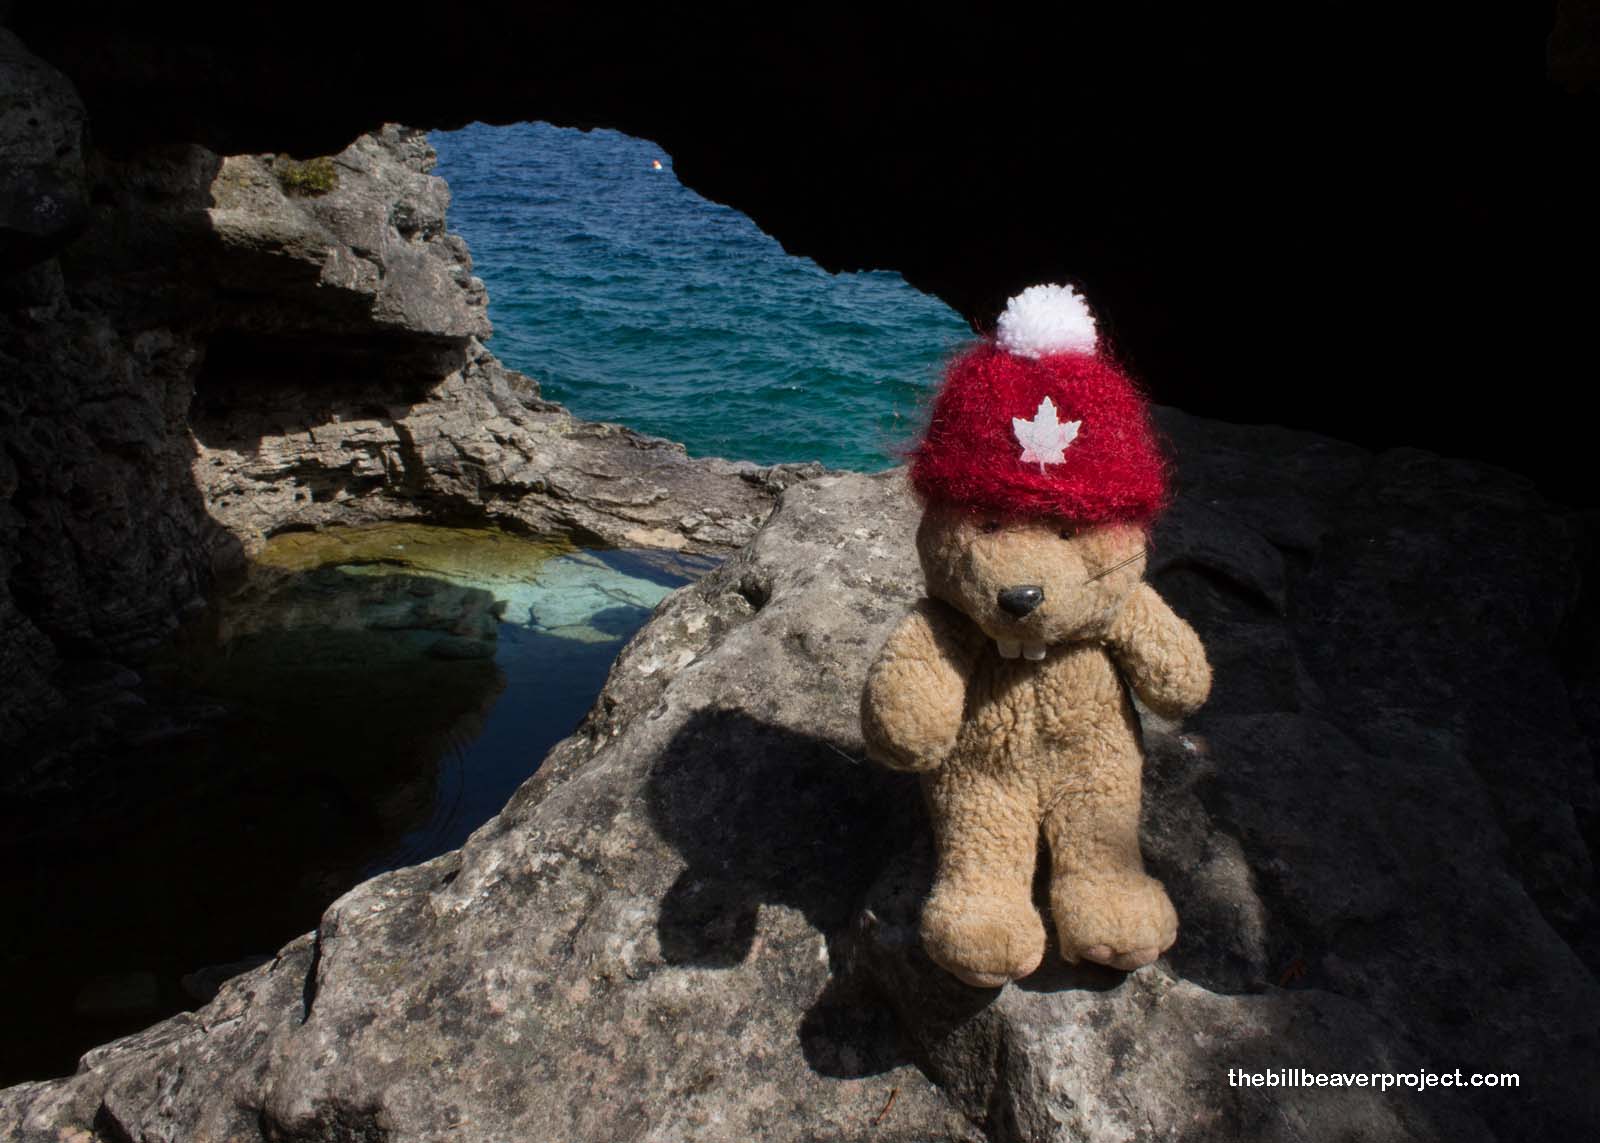 The Grotto is one spectacular sea cave!